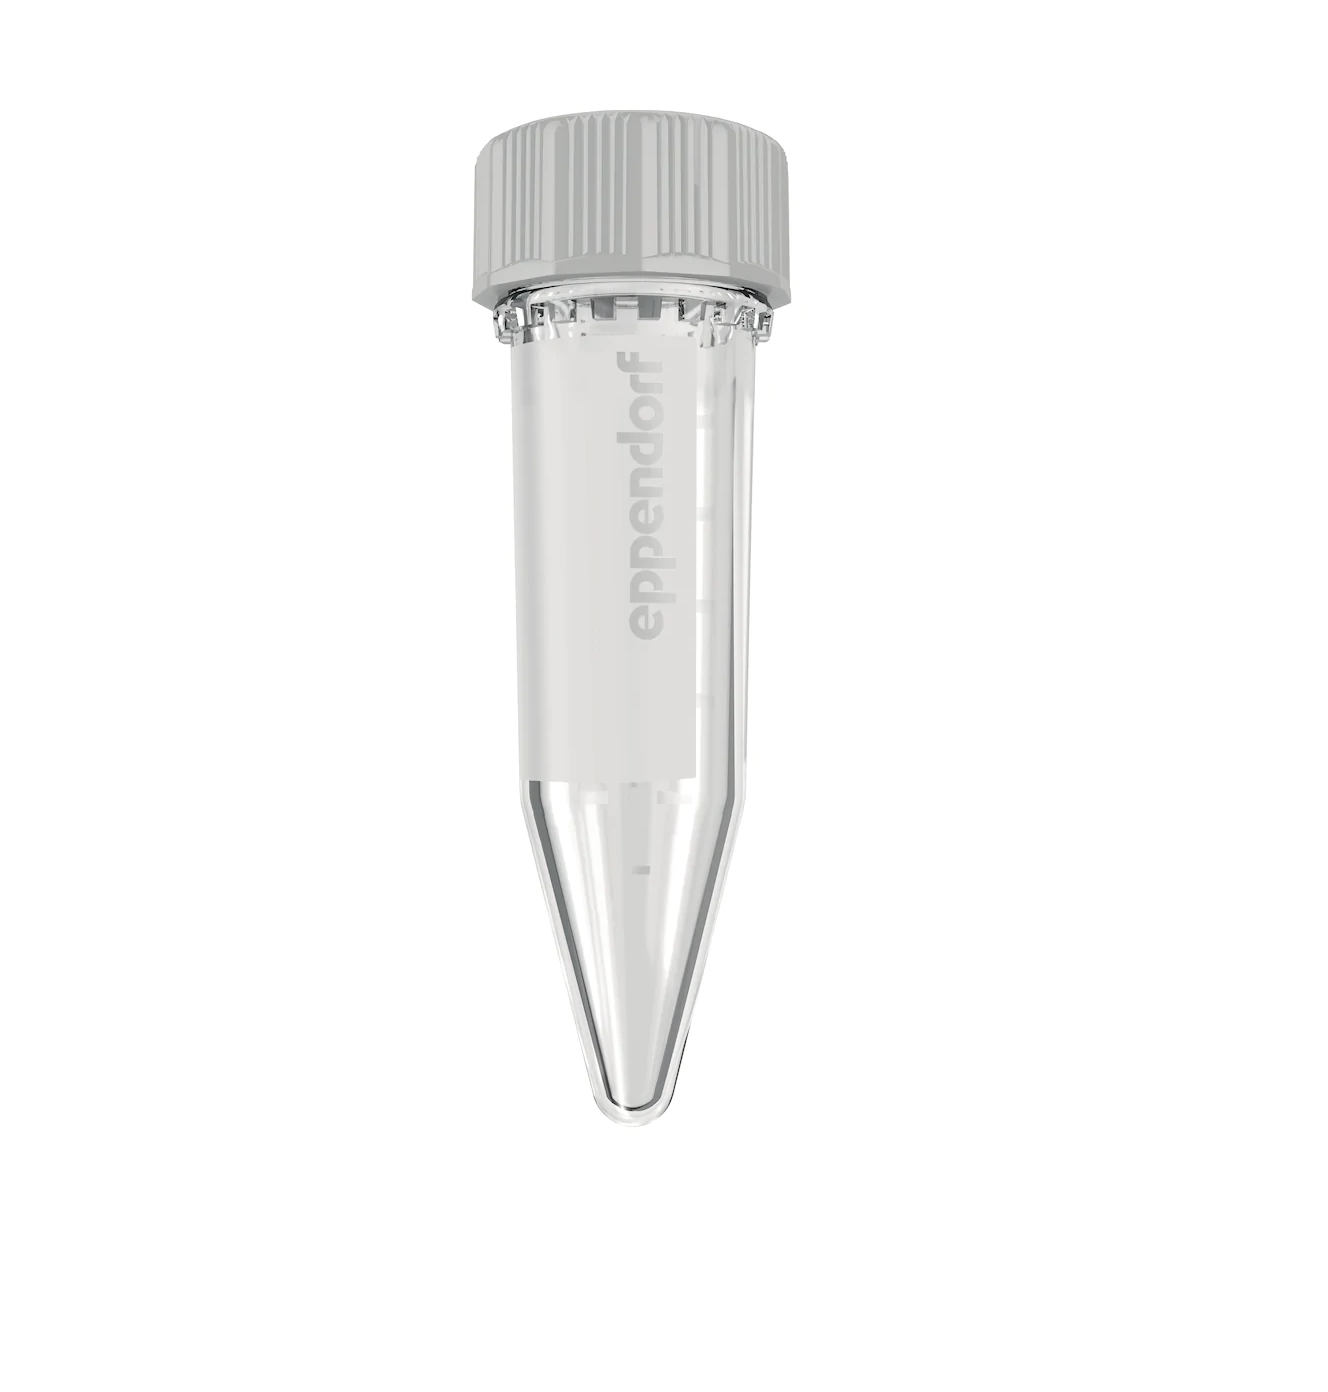 Eppendorf Tubes® 5.0 mL with screw cap, 5.0 mL, Eppendorf Quality™, colorless, 200 tubes (2 bags × 100 tubes)